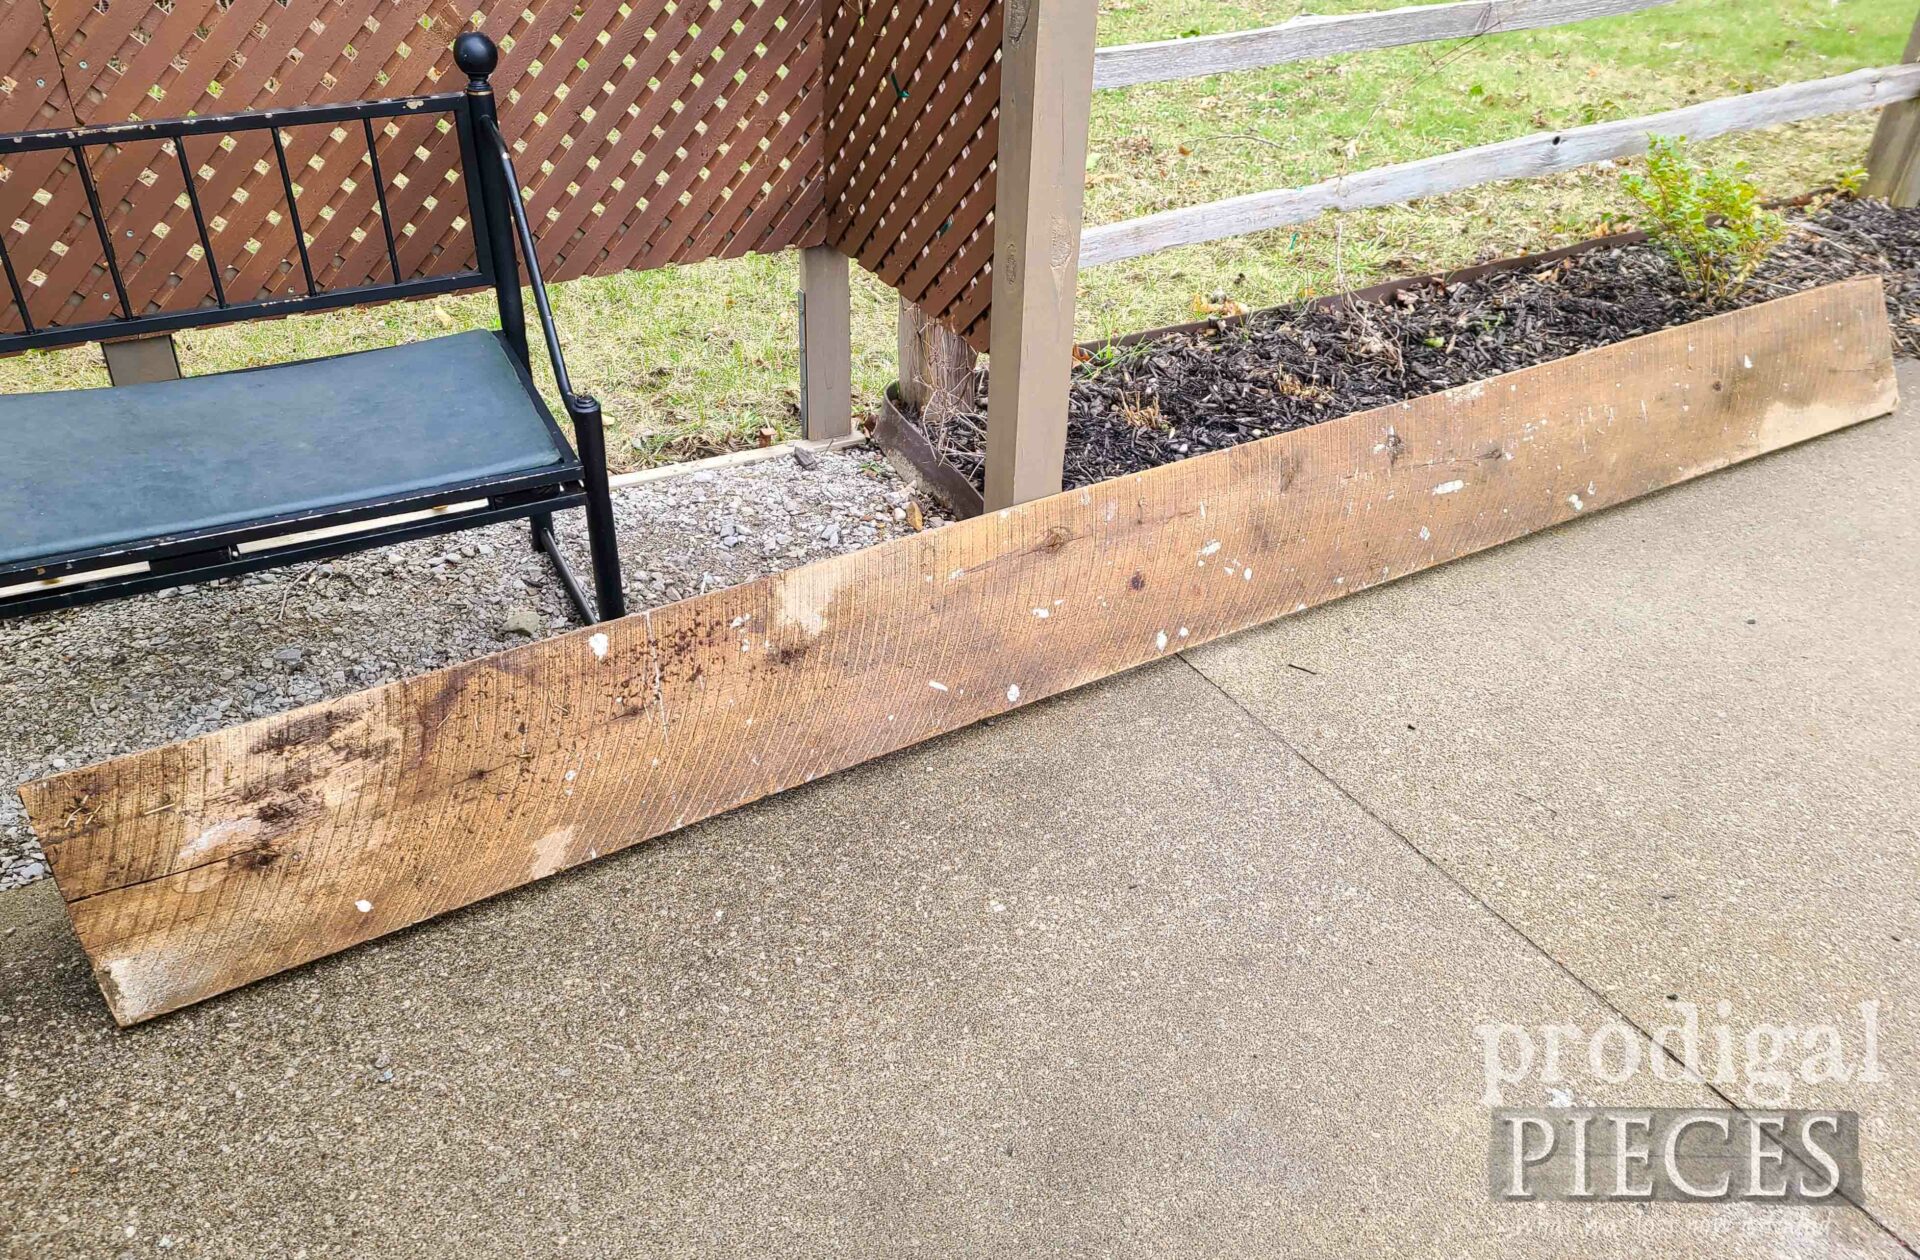 Curbside Reclaimed Board Before | prodigalpieces.com #prodigalpieces